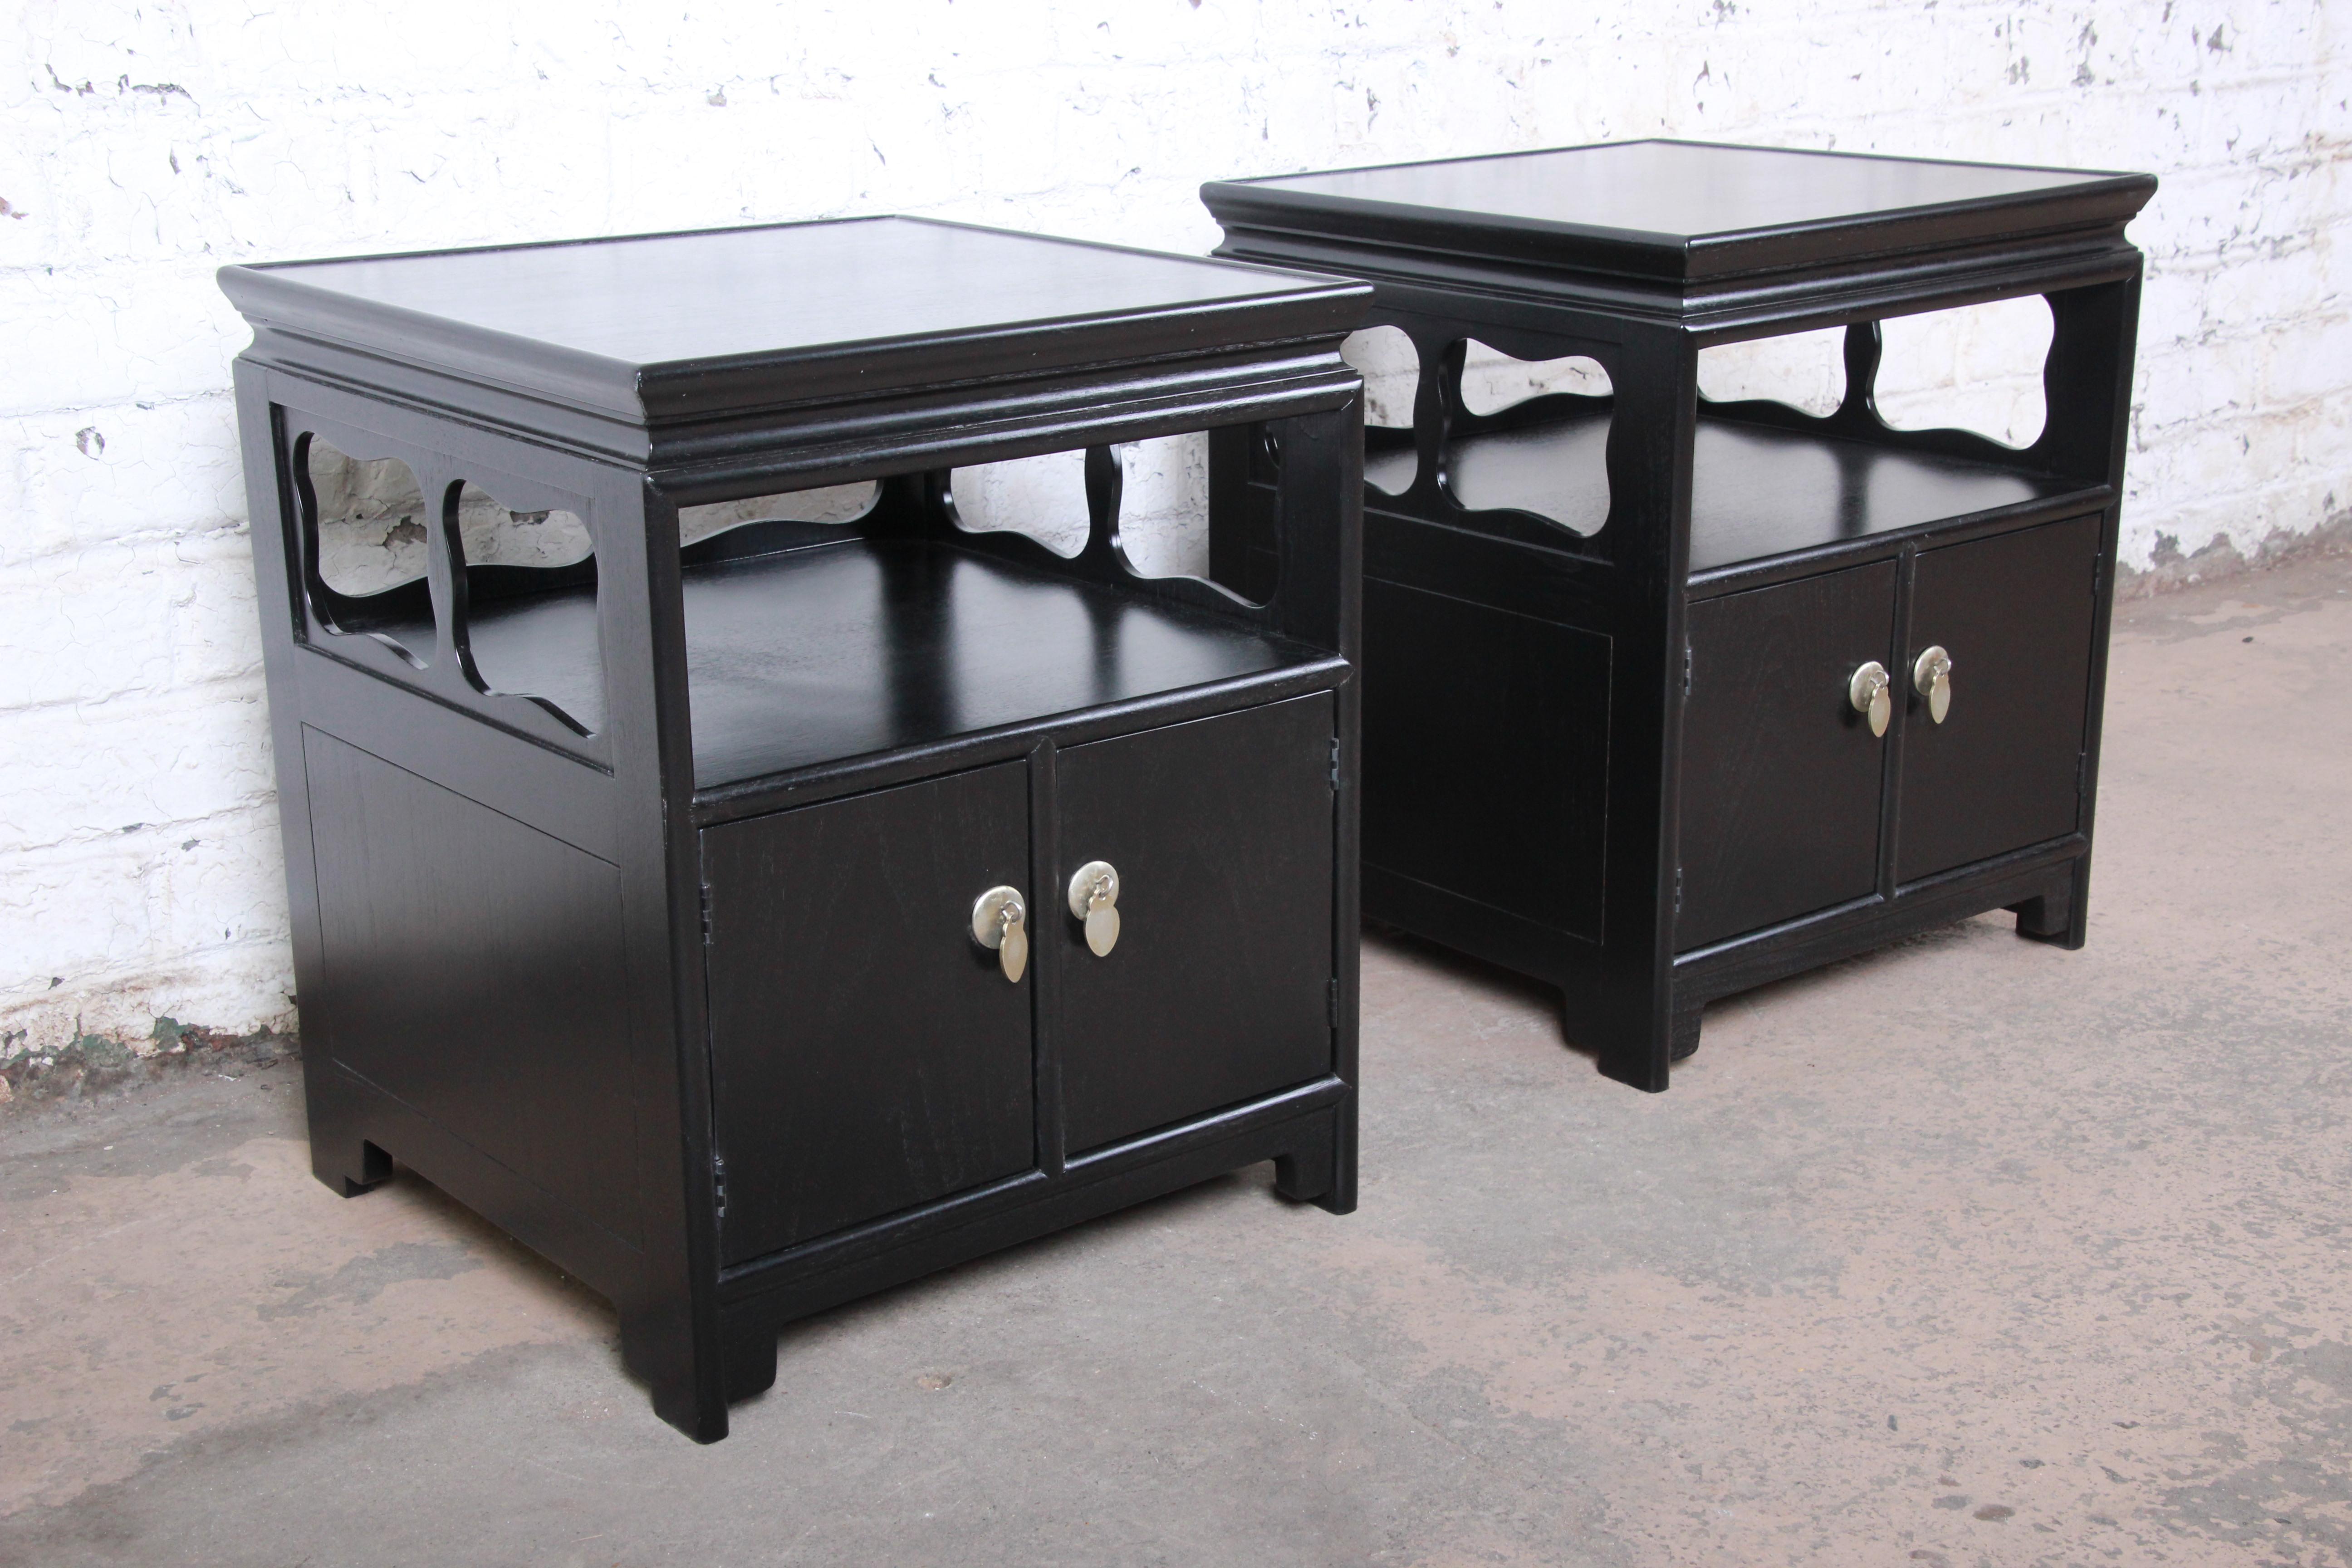 An exceptional pair of mid-century Hollywood Regency chinoiserie nightstands from the Far East Collection by Michael Taylor for Baker Furniture. The nightstands feature beautiful walnut wood grain in a newly ebonized finish and sleek Asian-inspired